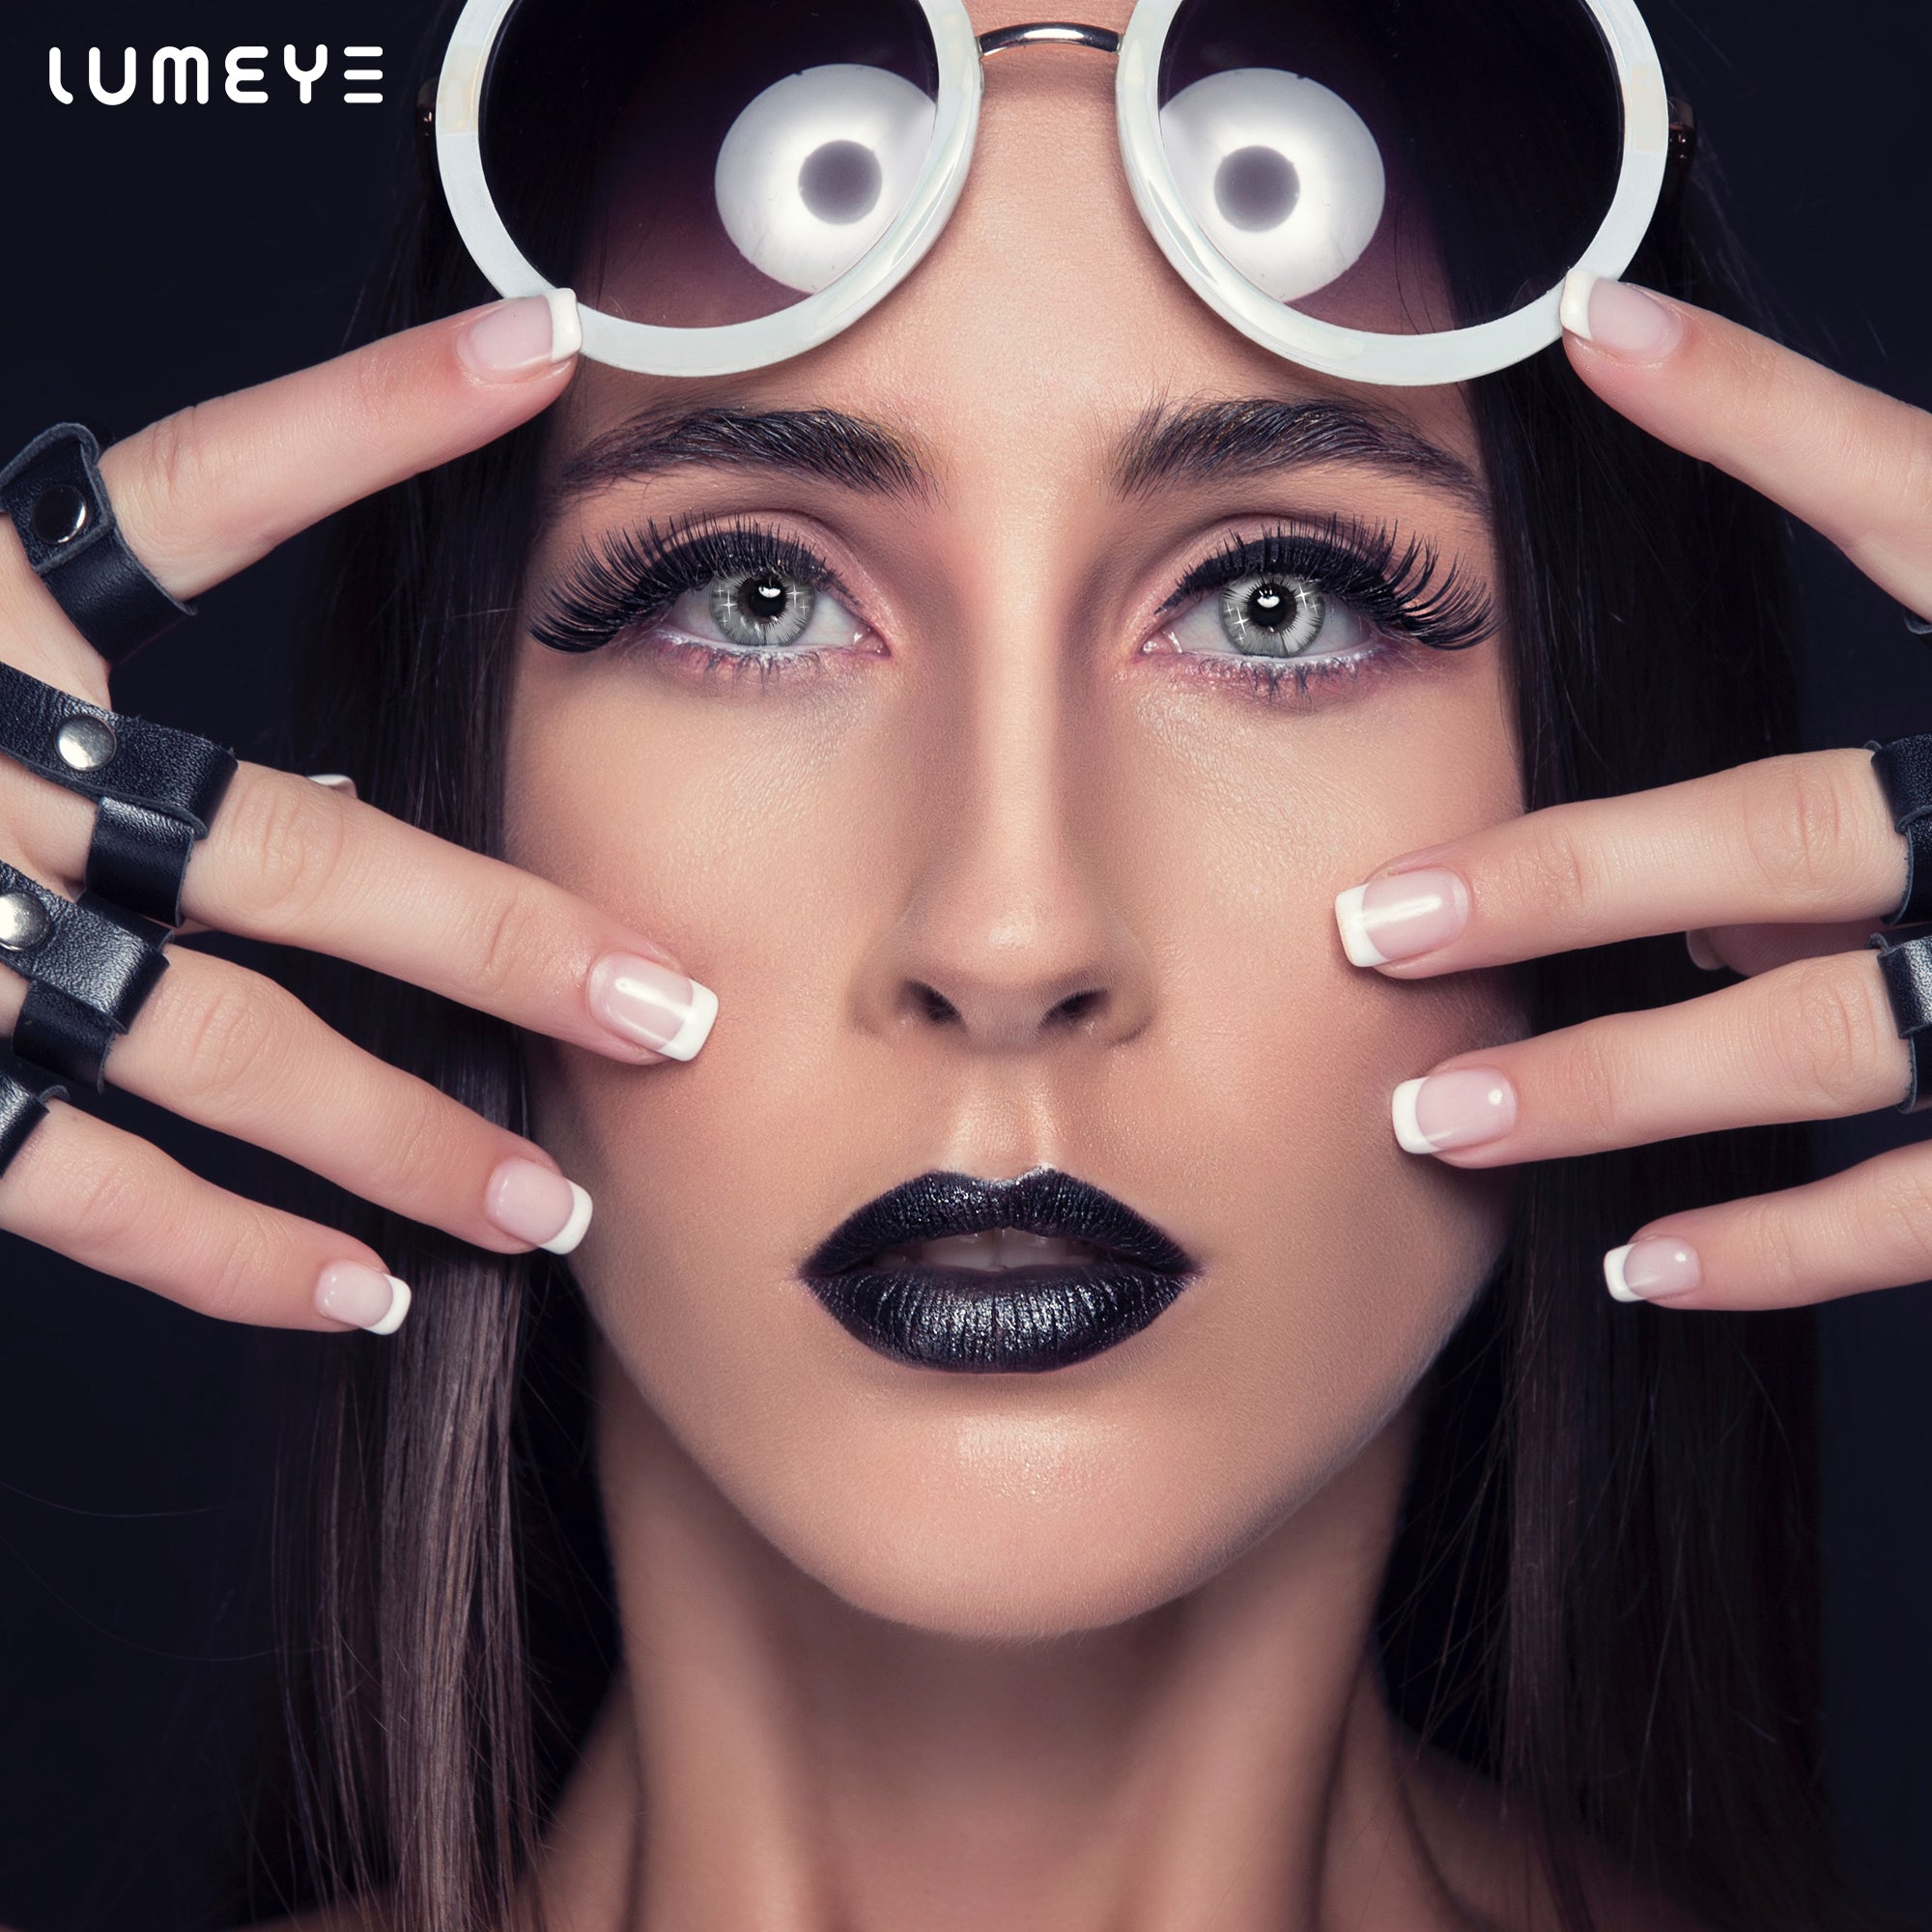 Best COLORED CONTACTS - LUMEYE Gradient Star Gray Colored Contact Lenses - LUMEYE